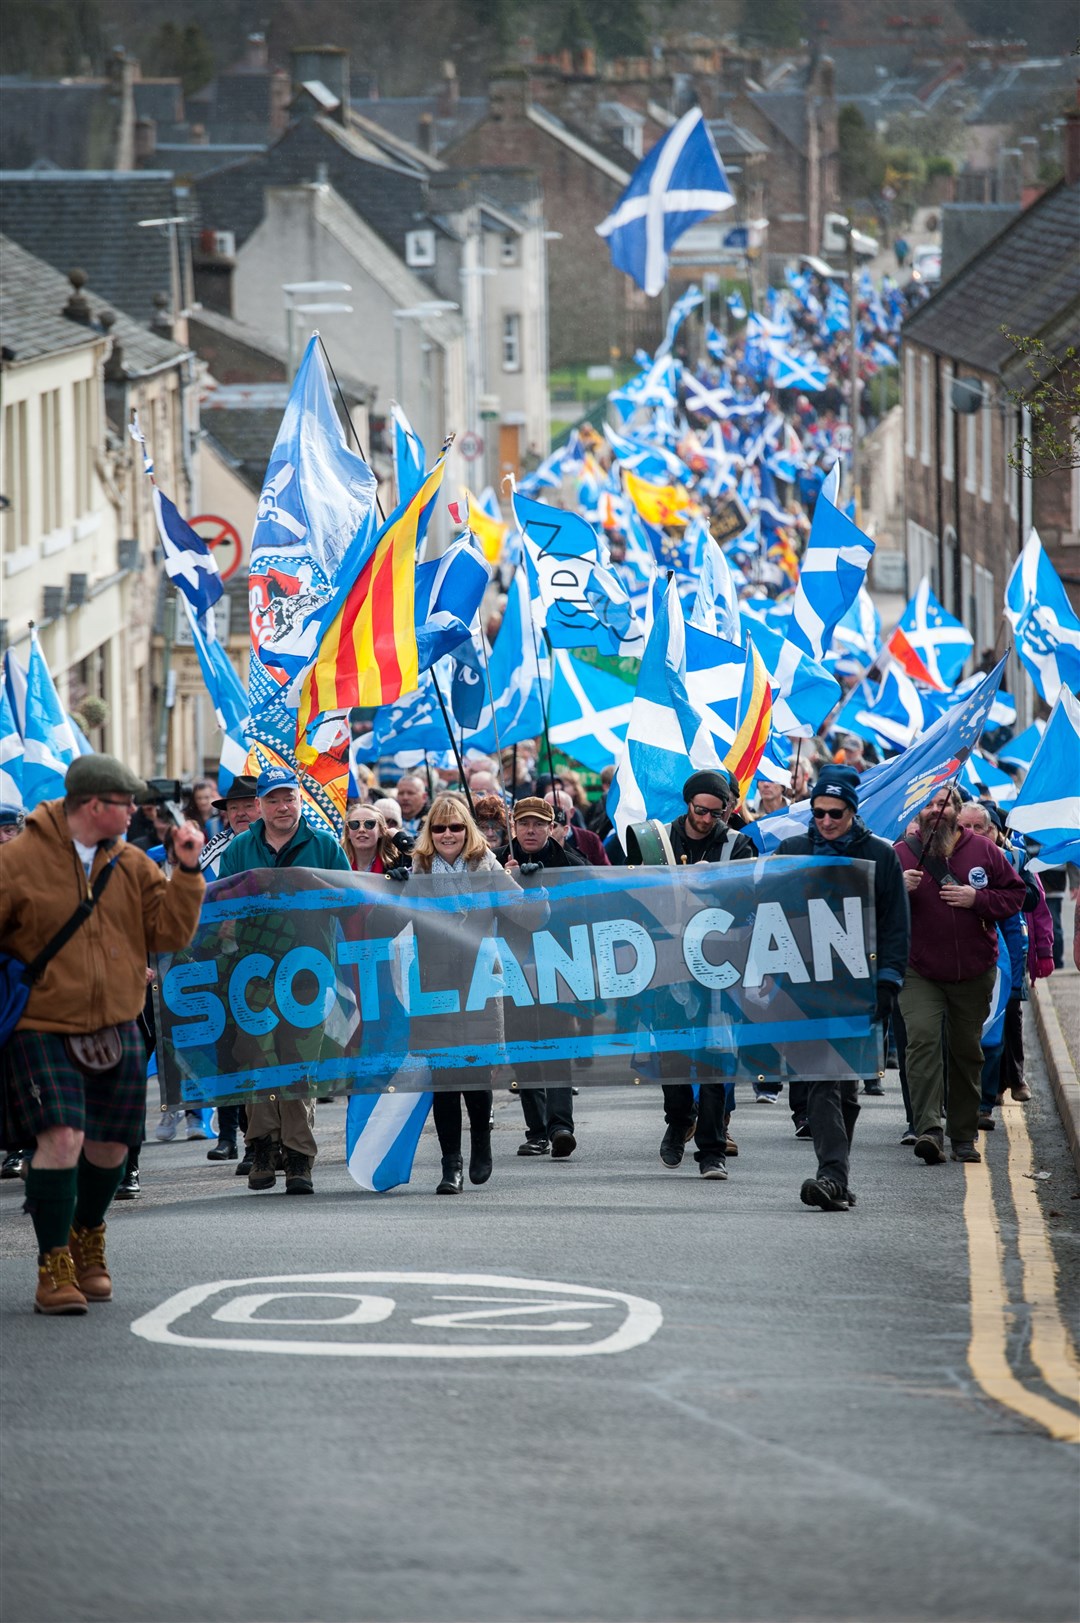 On the march in support of Independence.